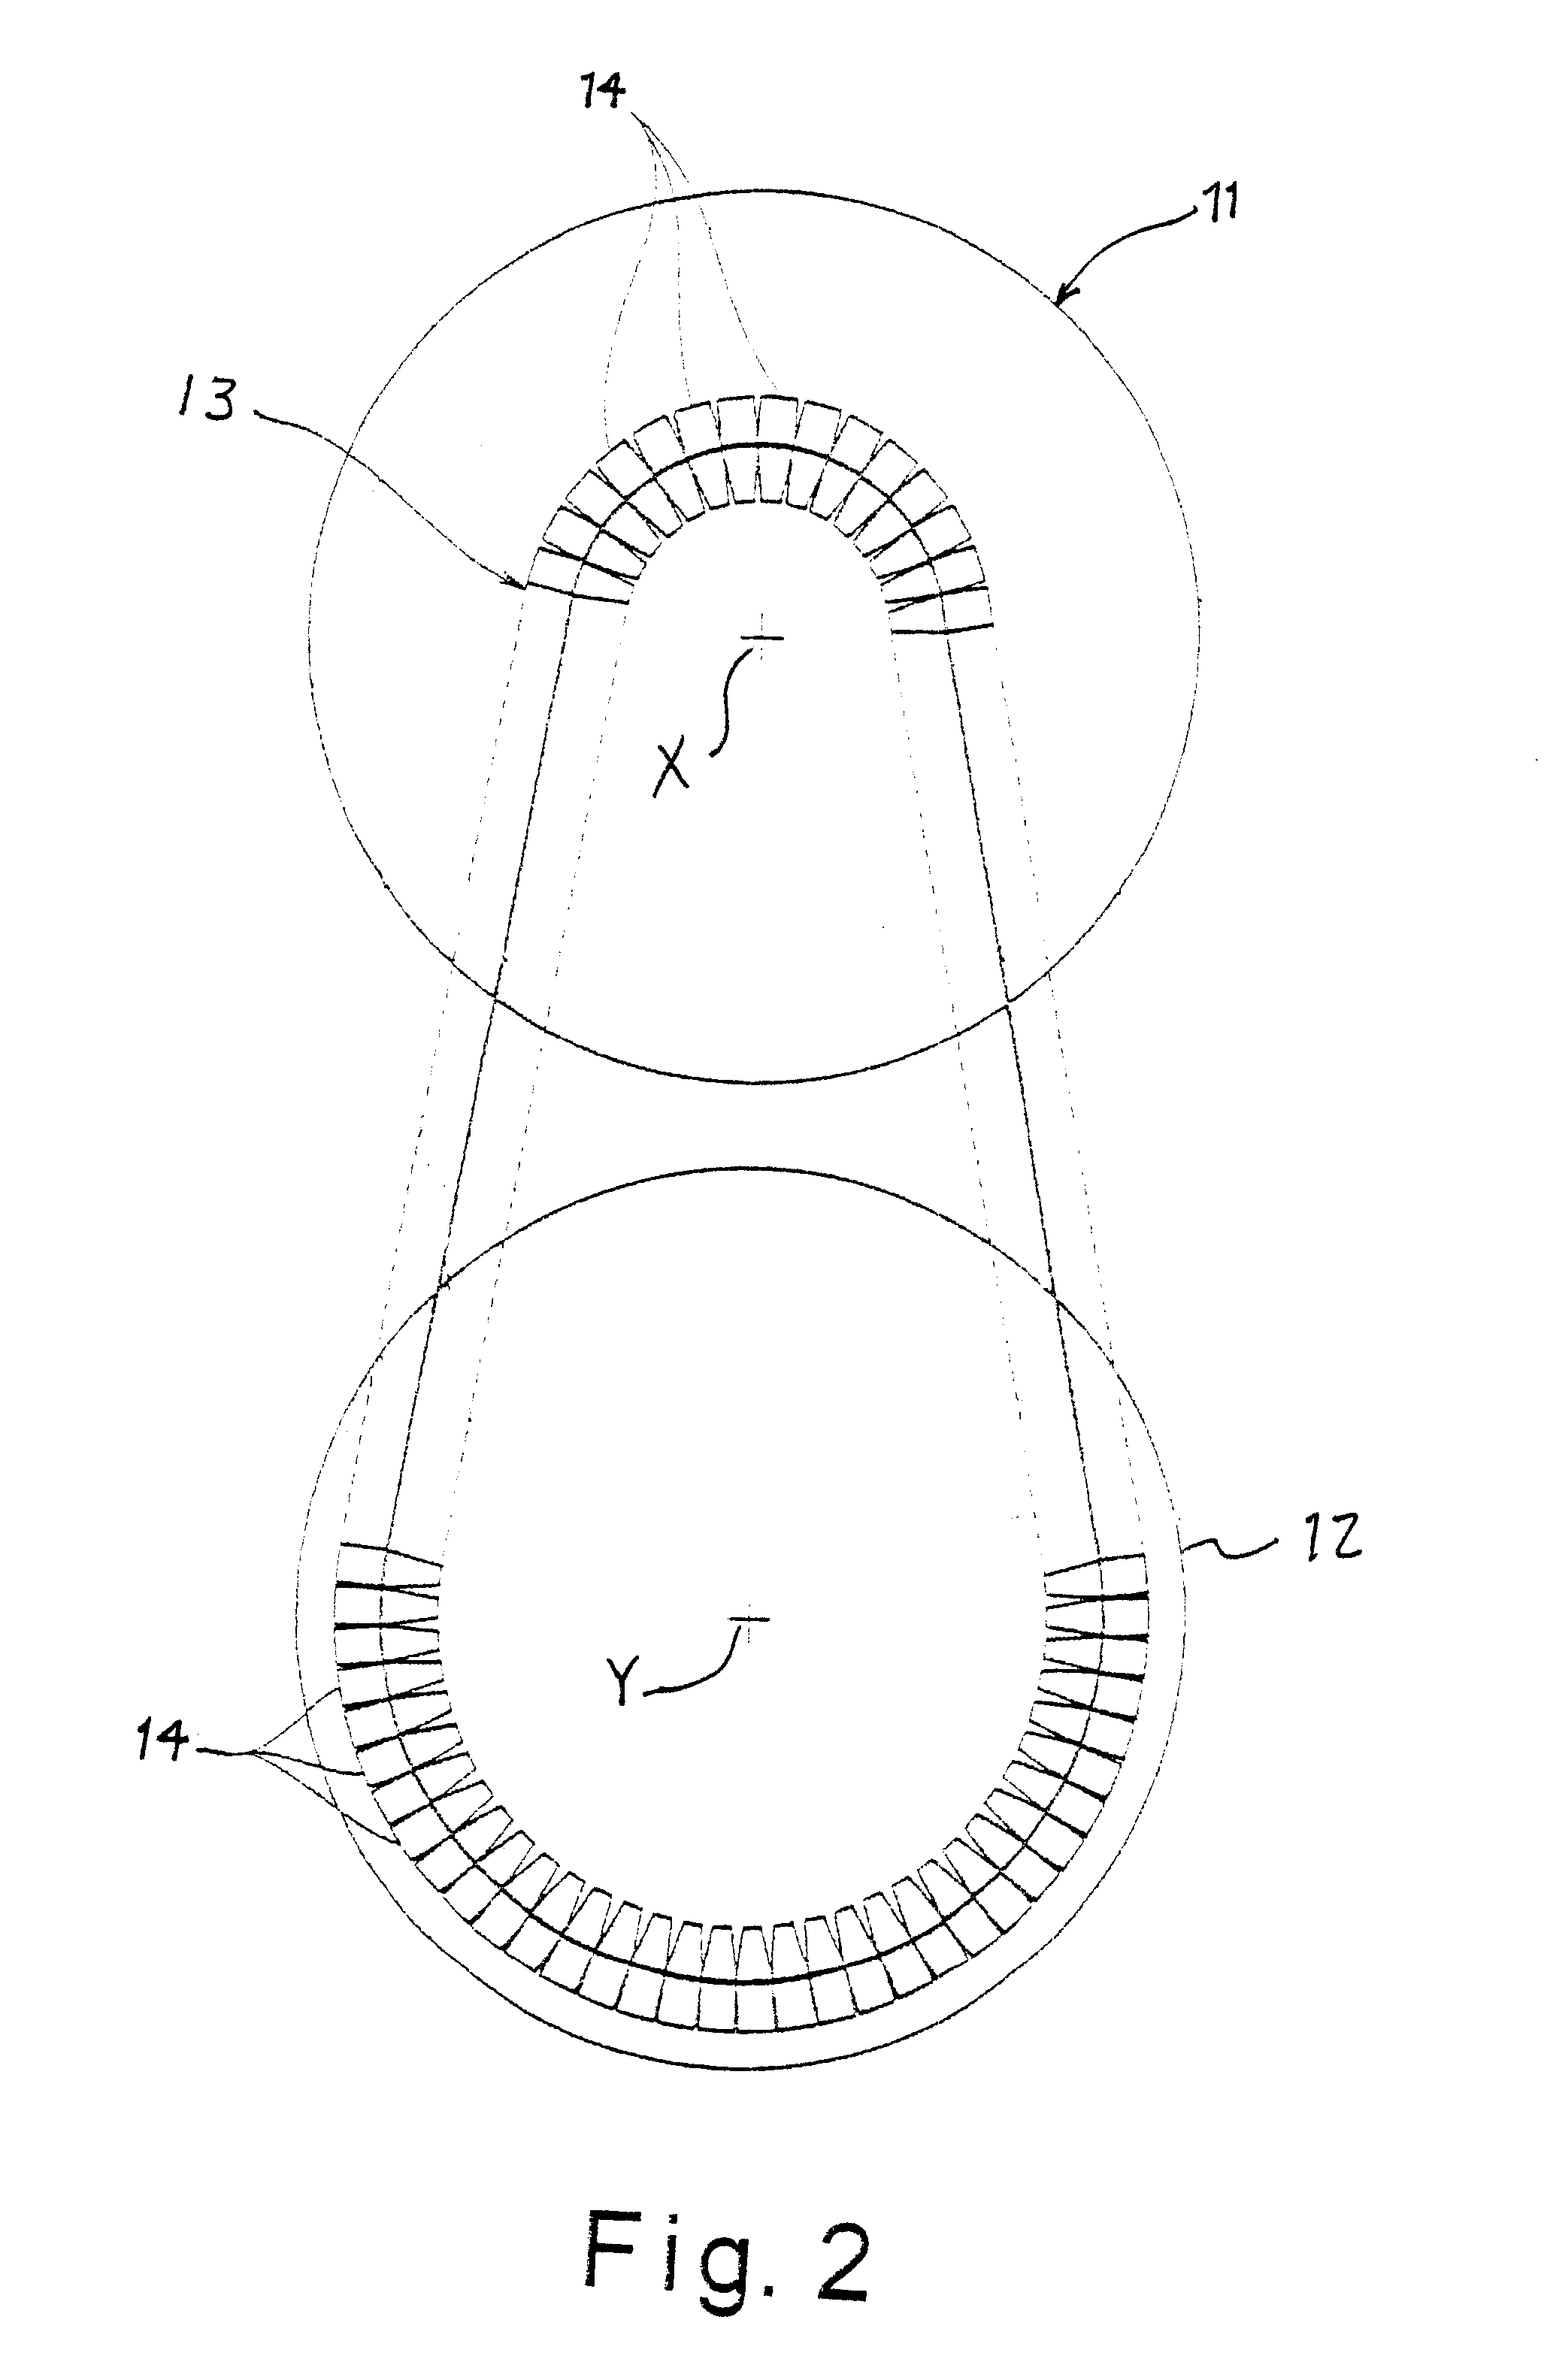 Drive belt for continuously variable transmission